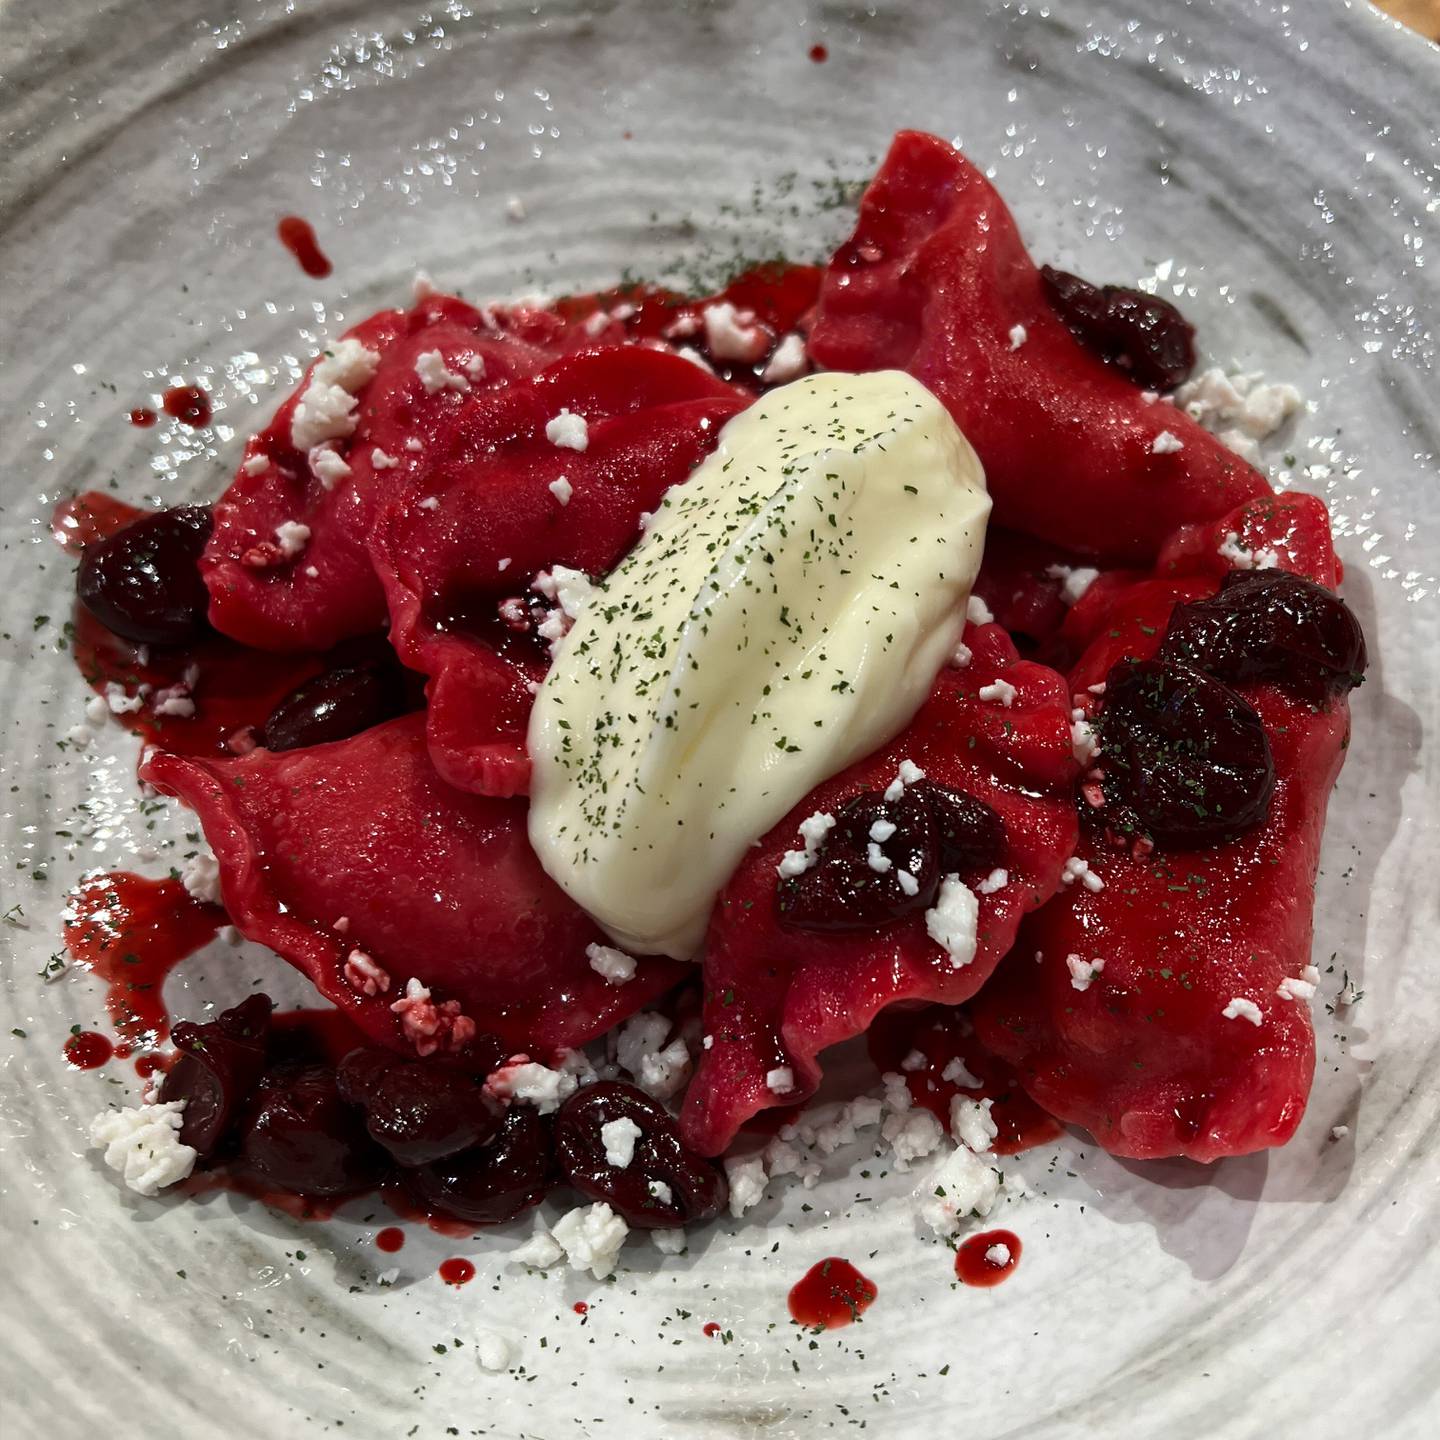 The red varenyky dessert with cherry coulis and sour cream. Photo: Yoy